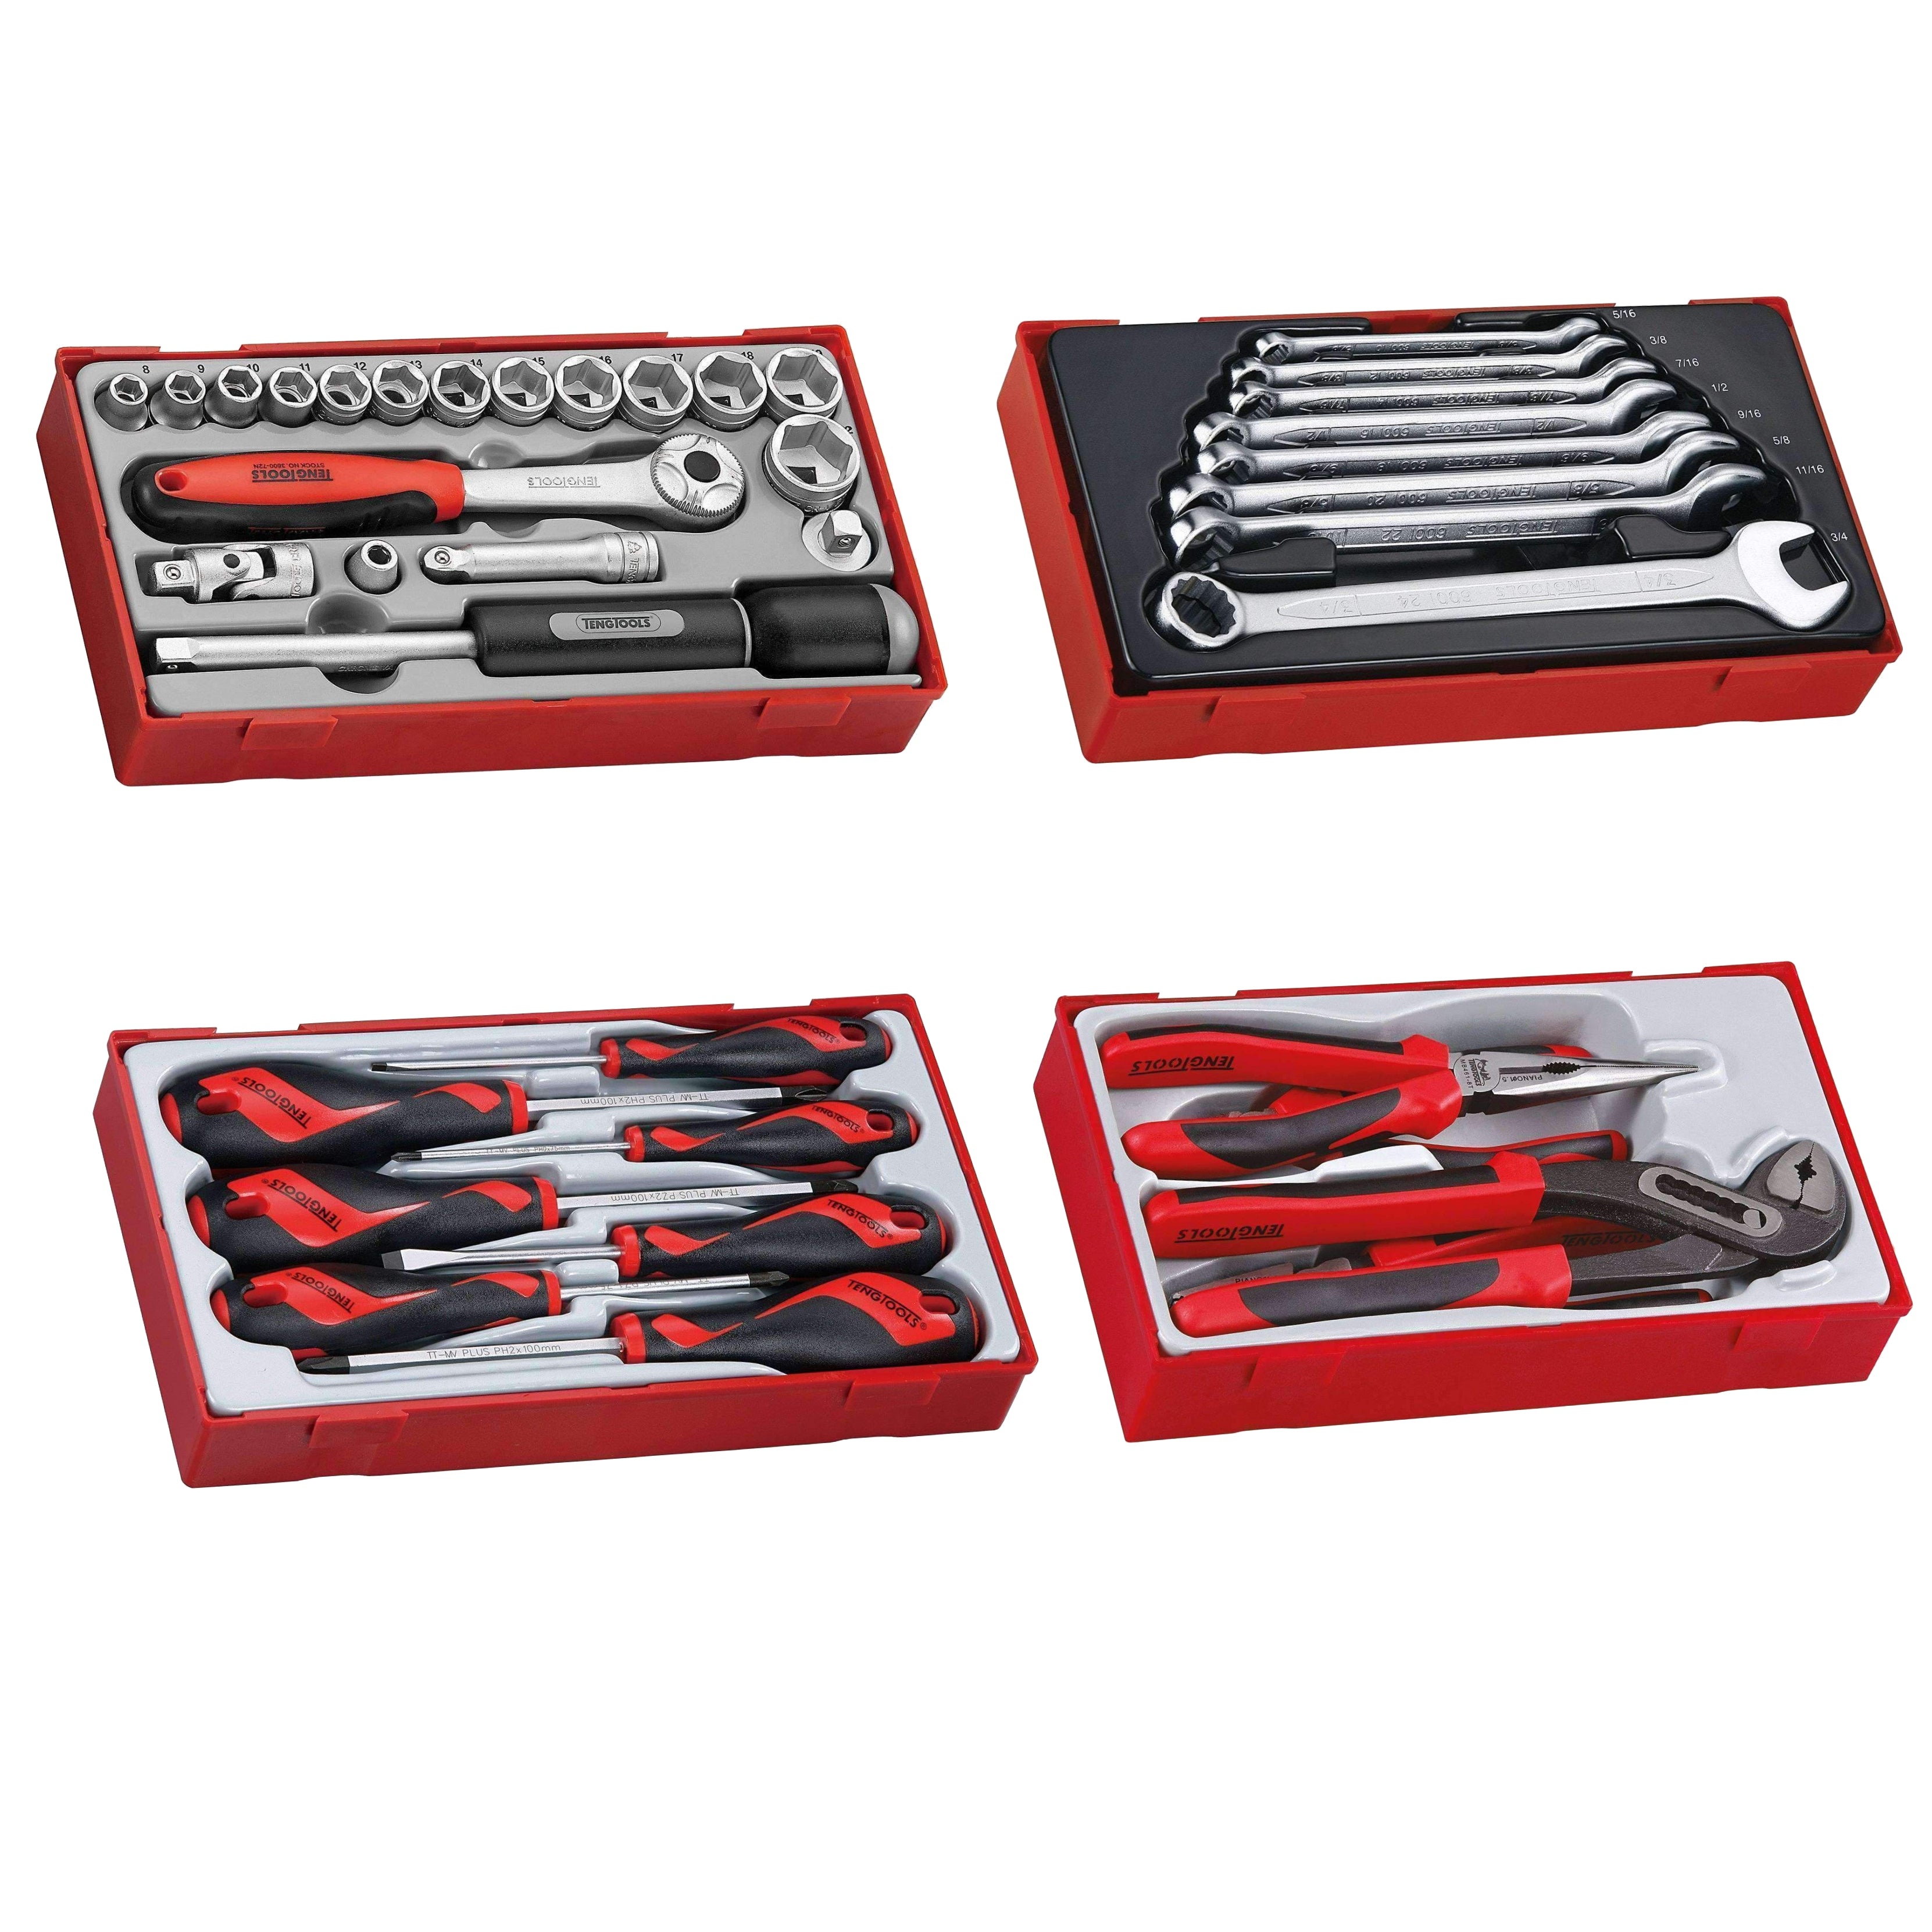 Teng Tools 184 Piece Complete Mixed Service Tool Kit